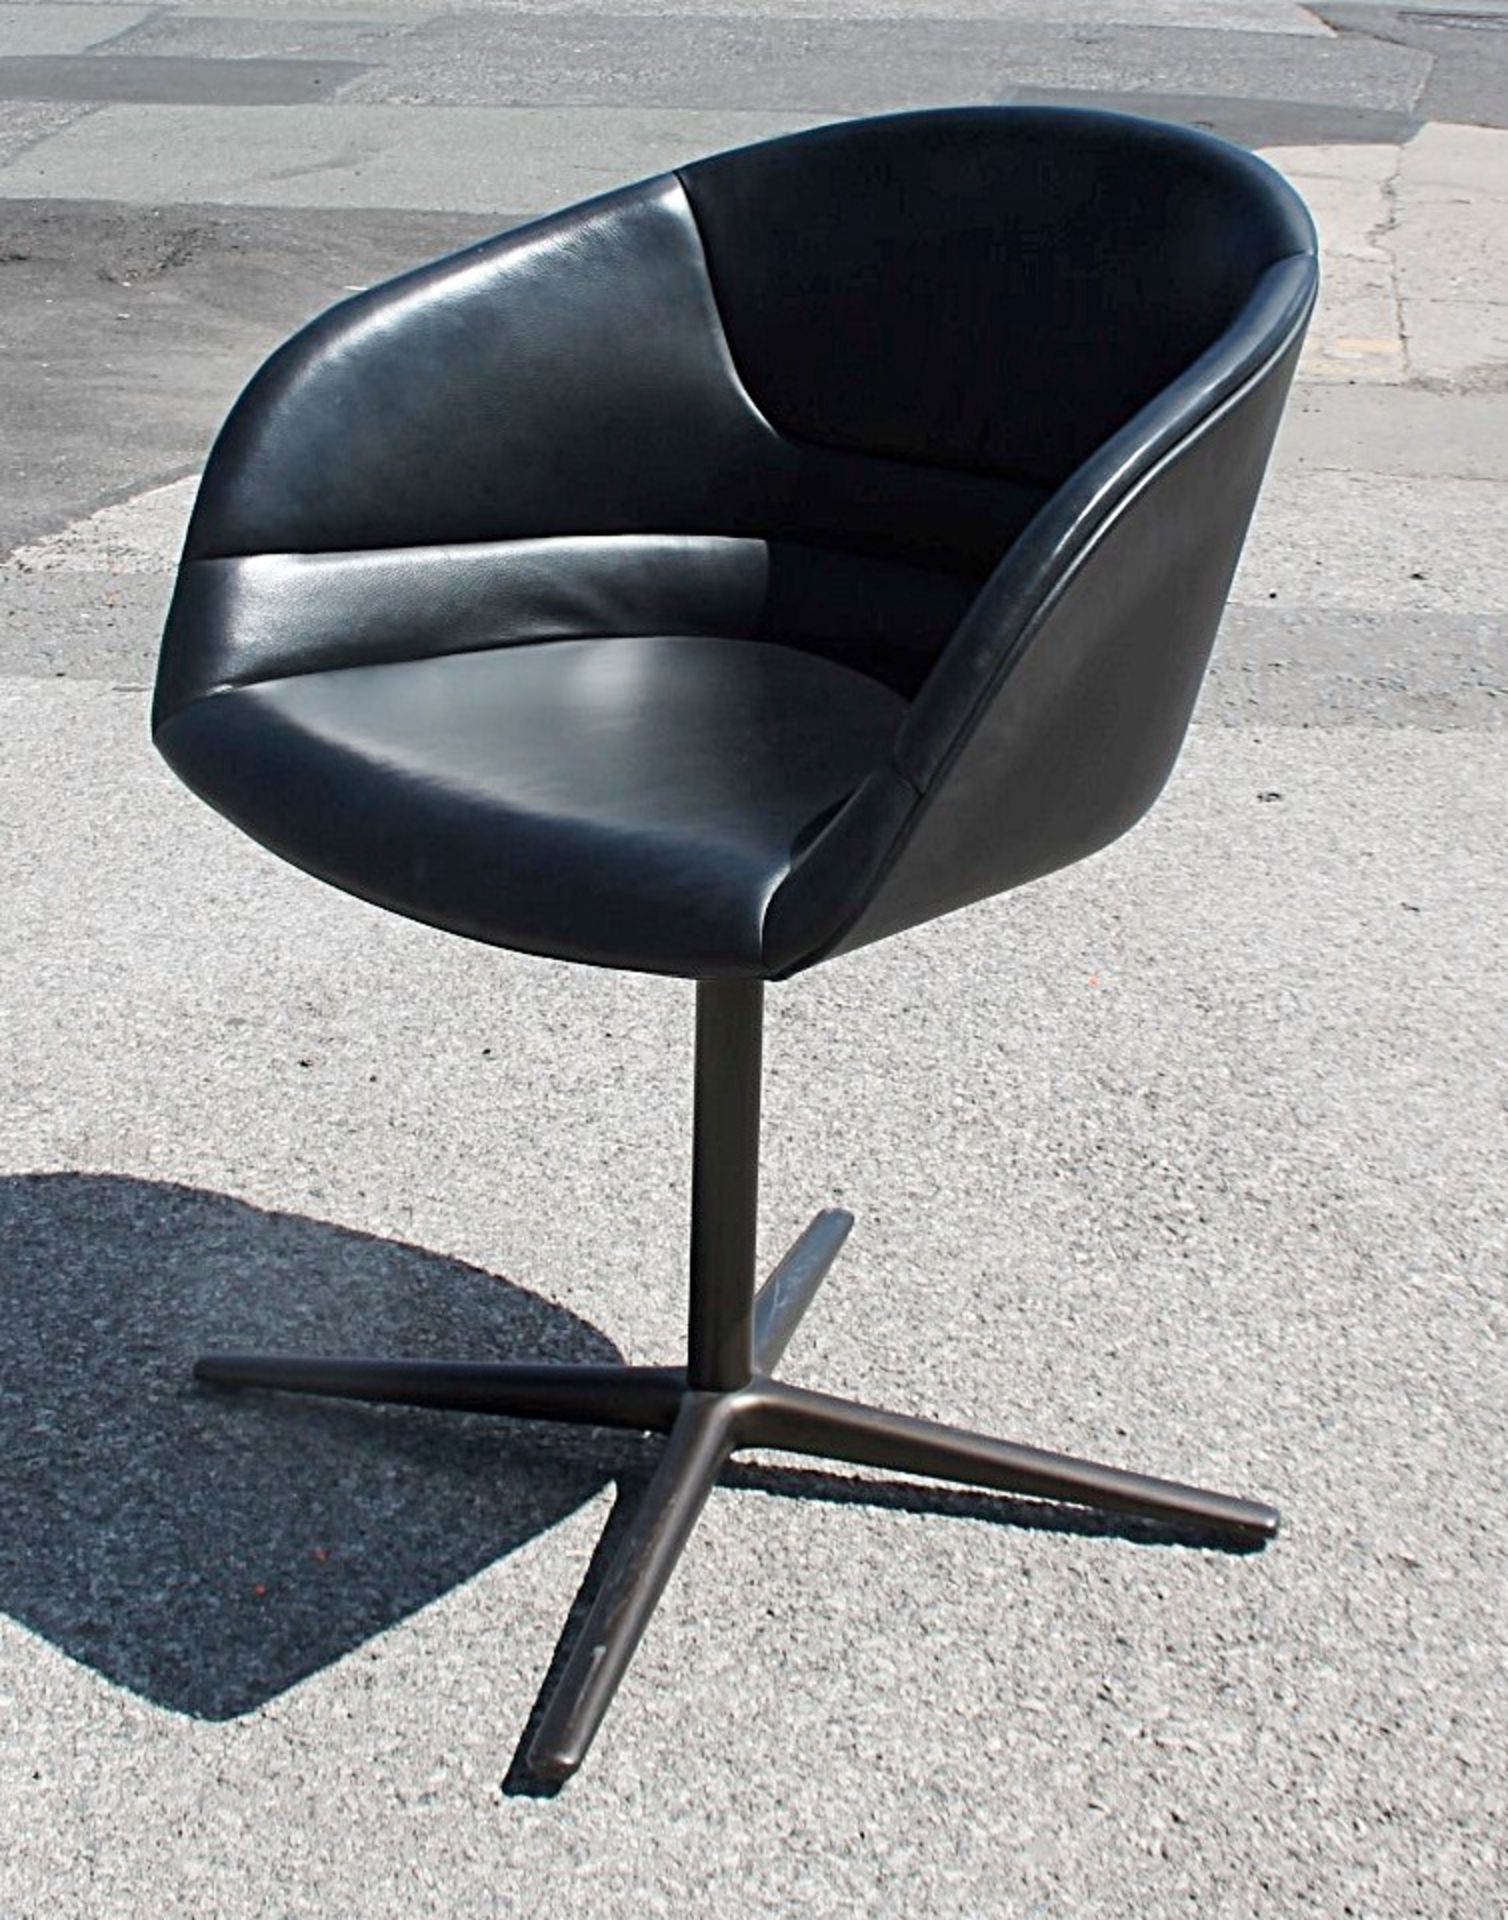 1 x WALTER KNOLL 'Kyo' Genuine Leather Upholstered Chair - Original RRP £1,979 - CL753 - Ref: - Image 6 of 6